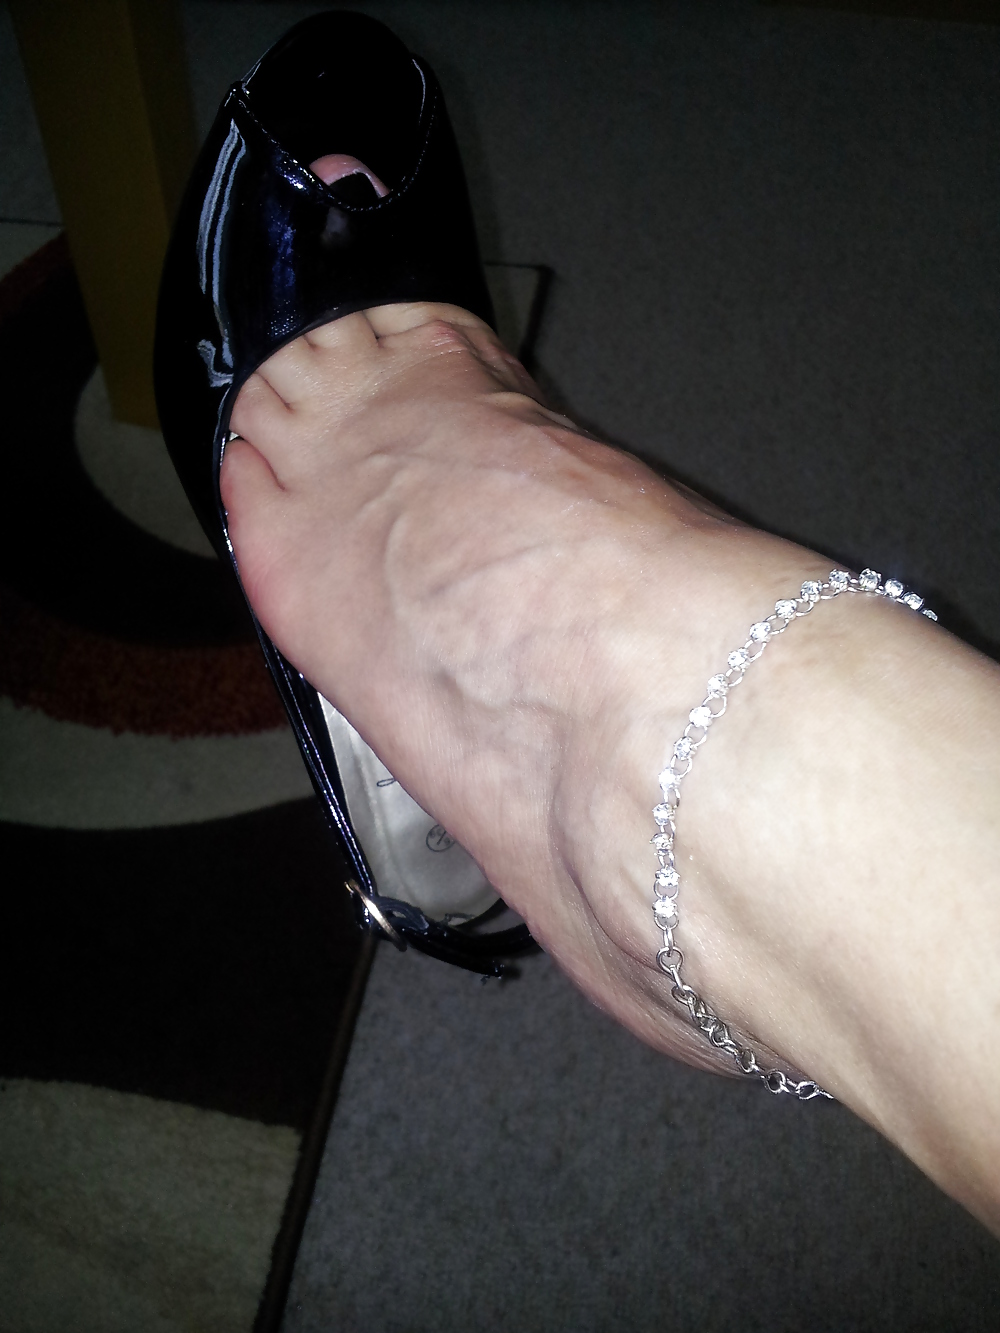 Free my sexy new peep toe shoes off my man photos